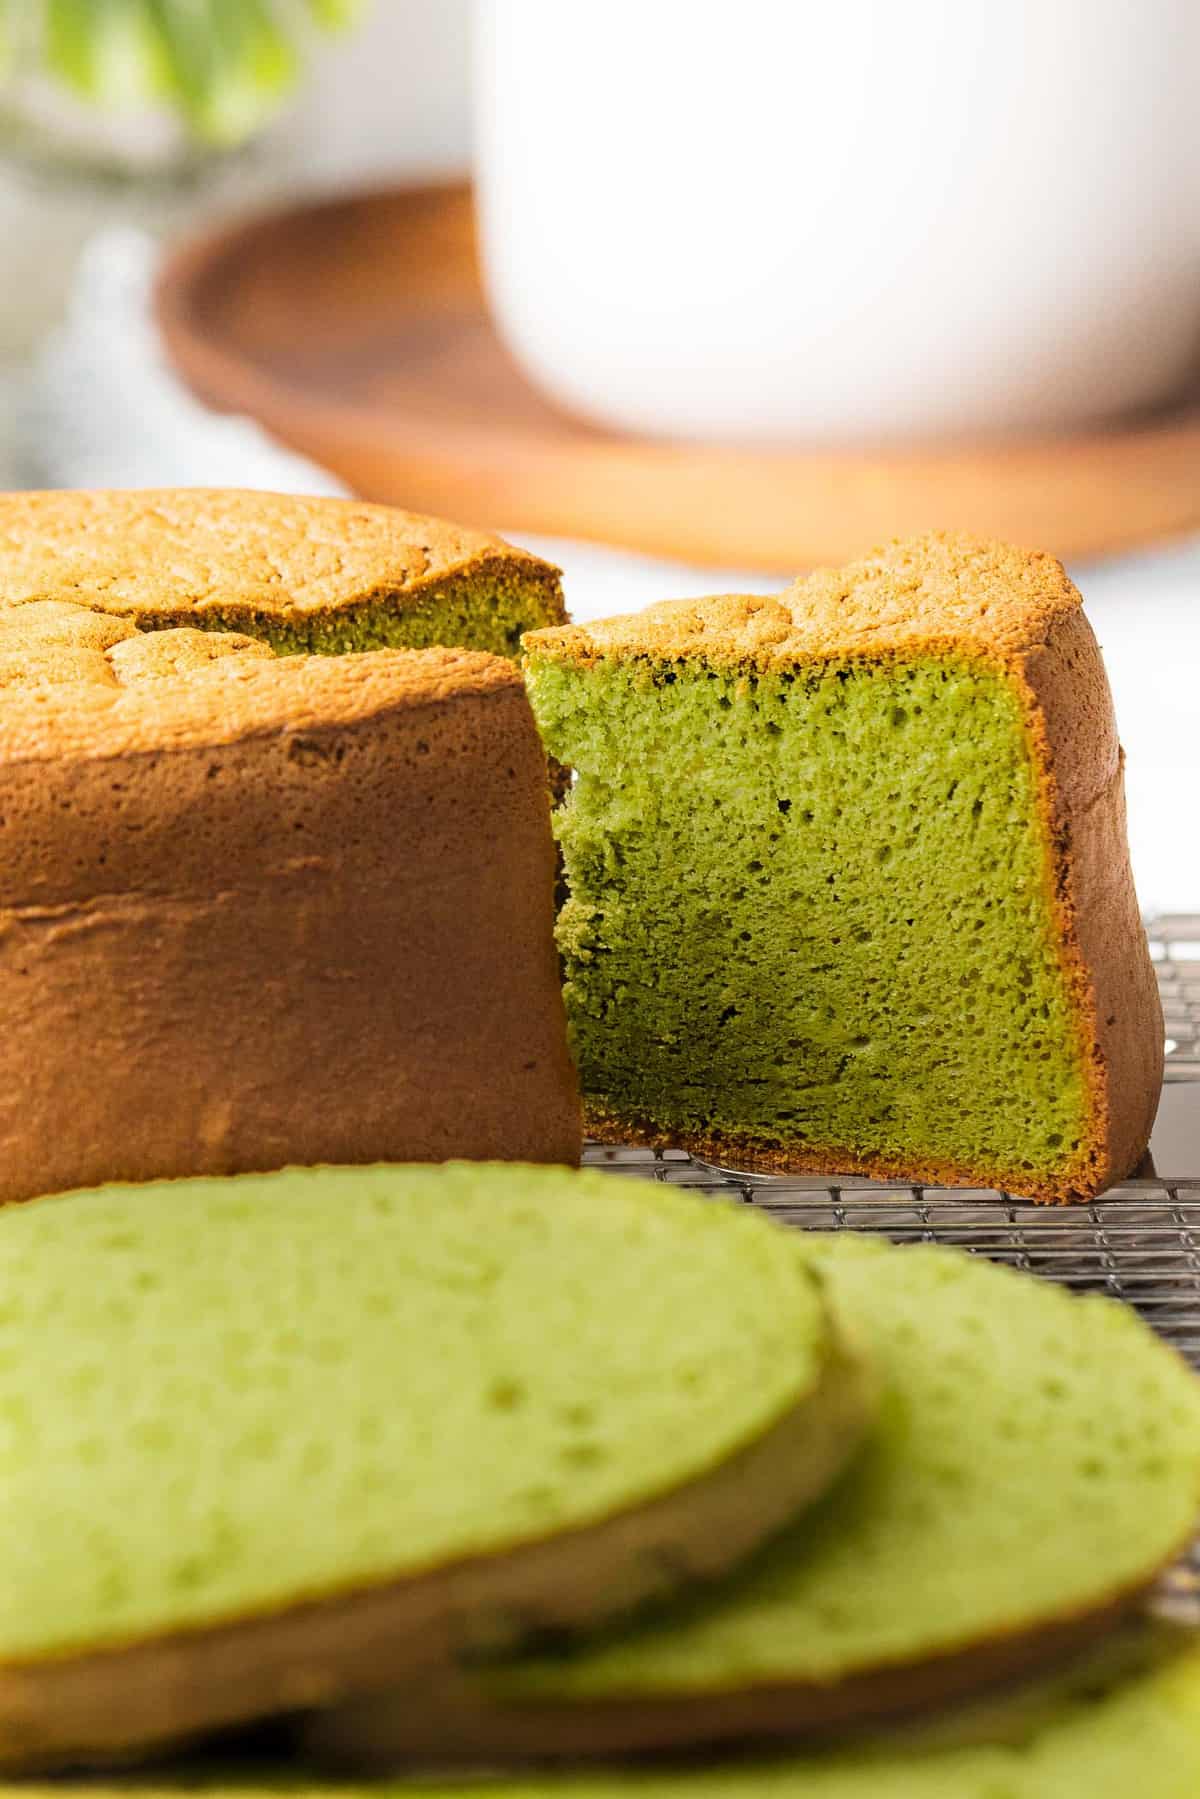 Matcha cake with soft and fluffy green interior.